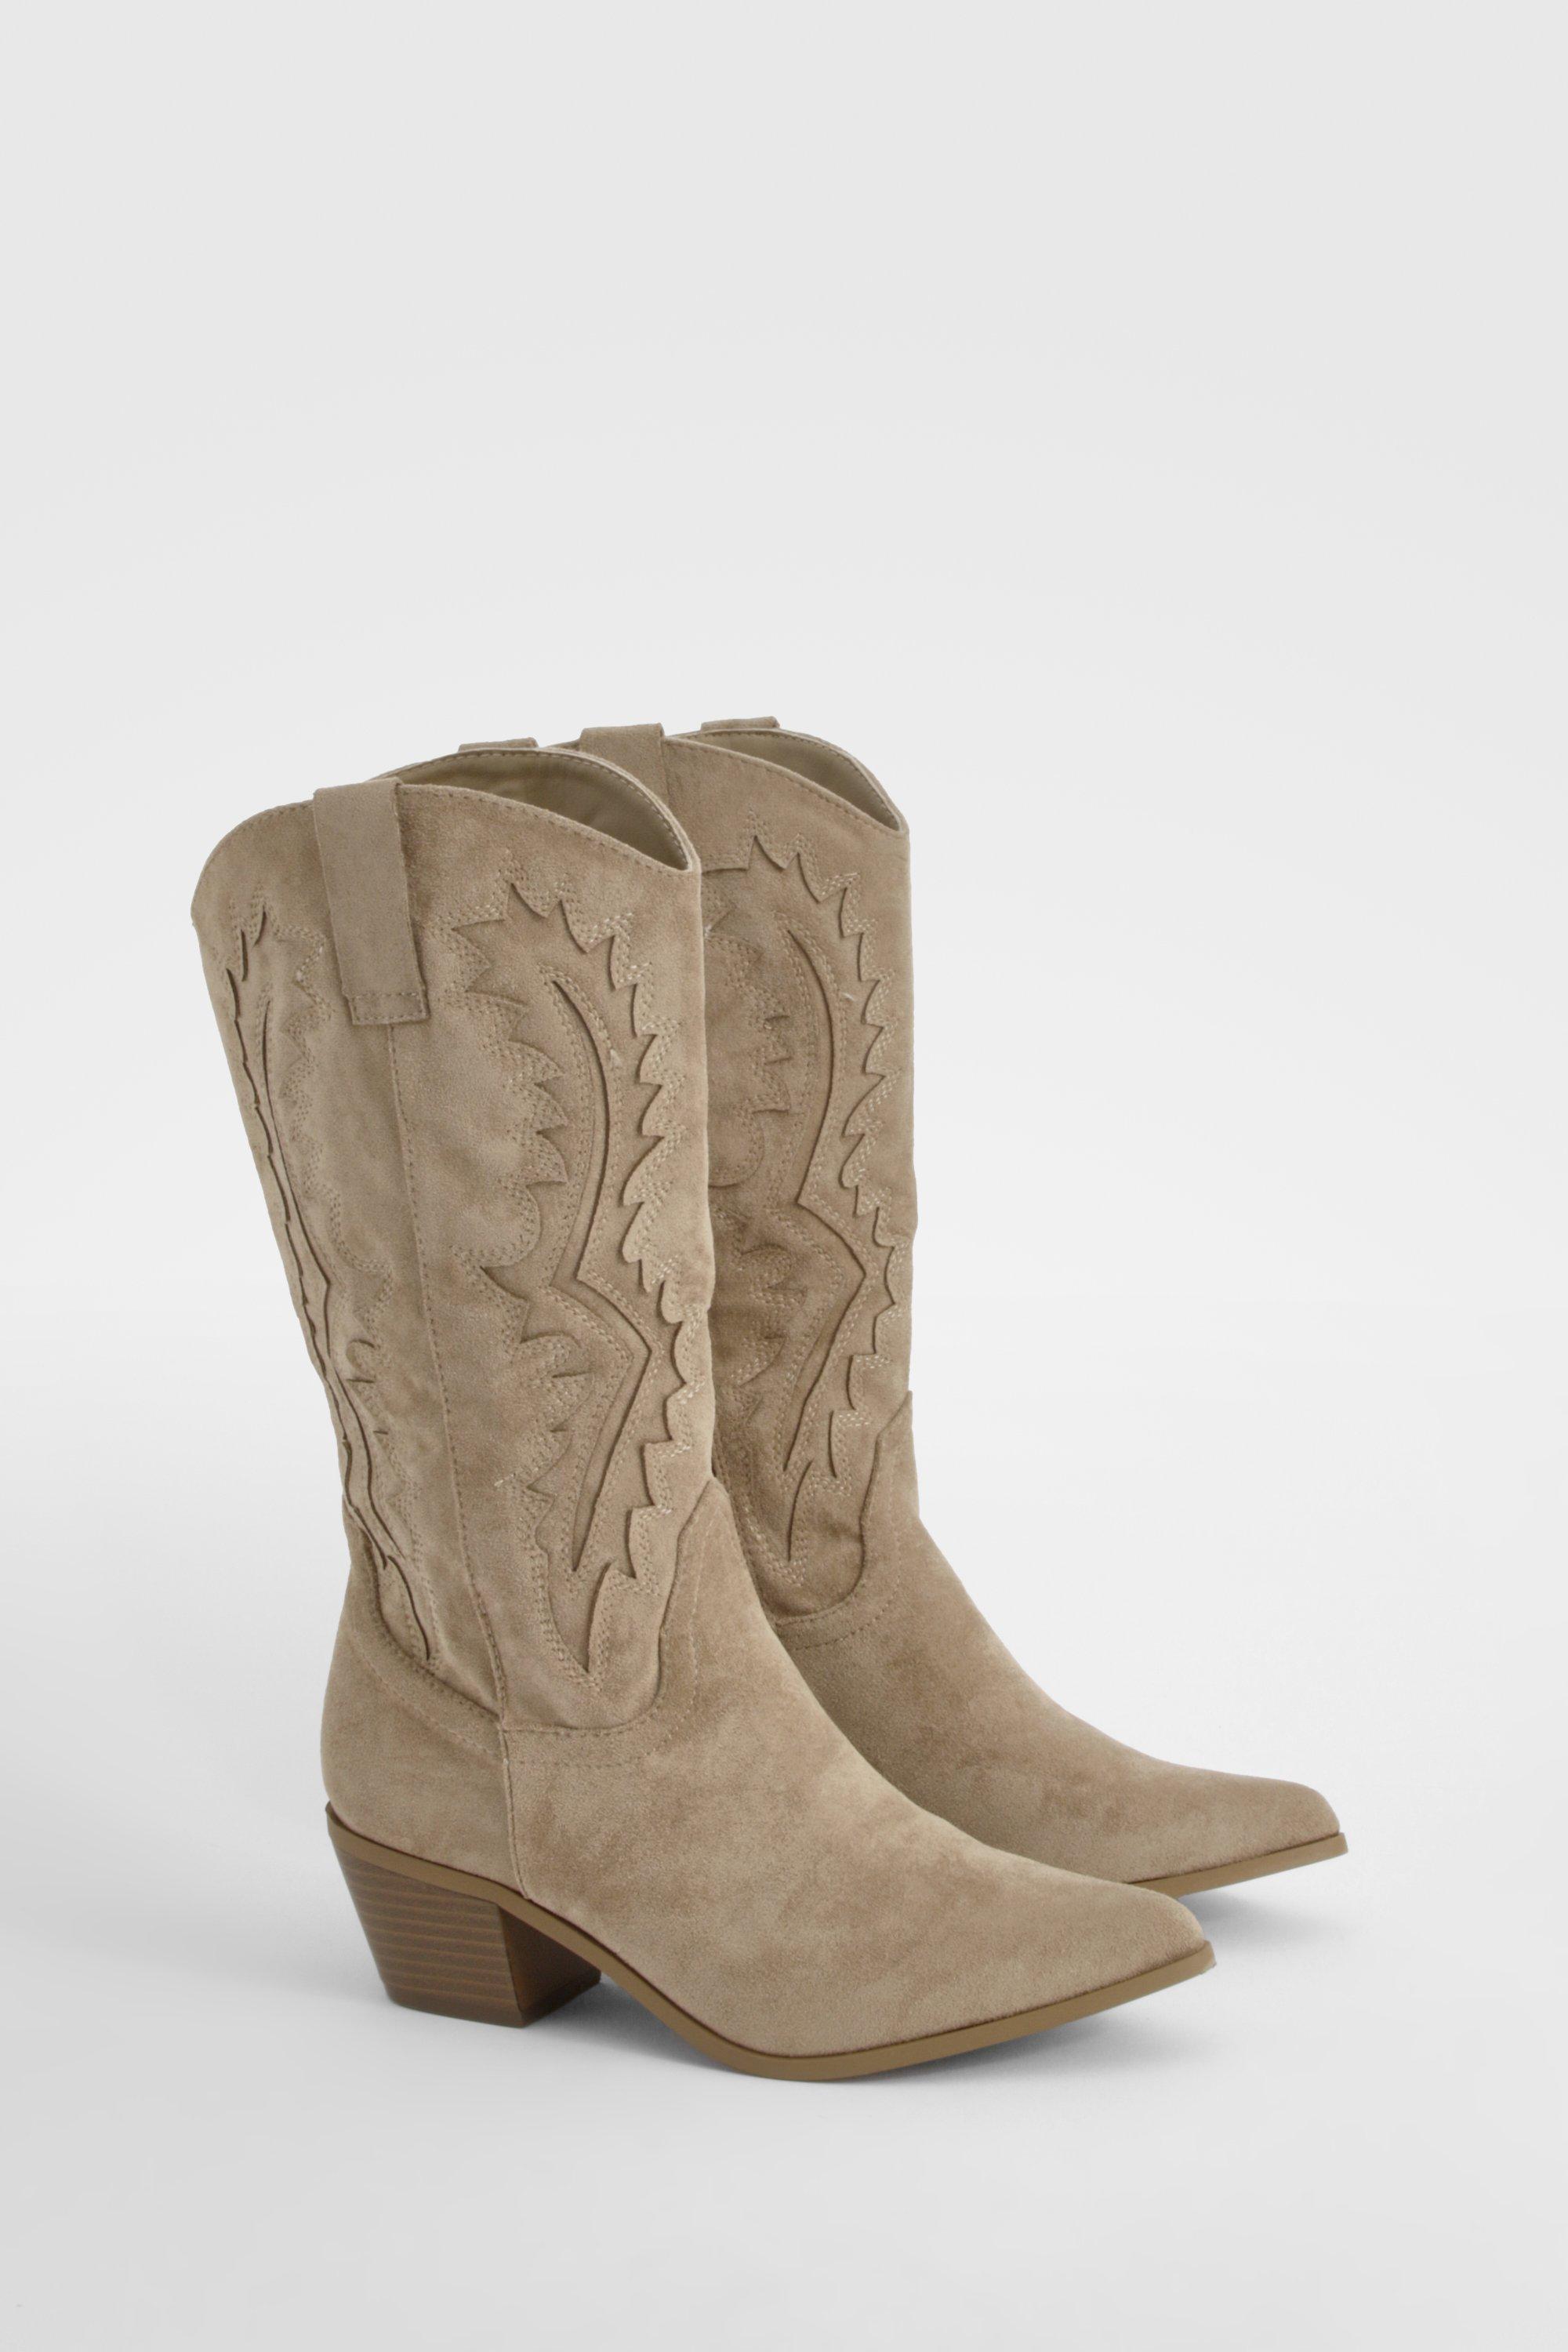 Boohoo Embroidered Western Cowboy Boots, Taupe